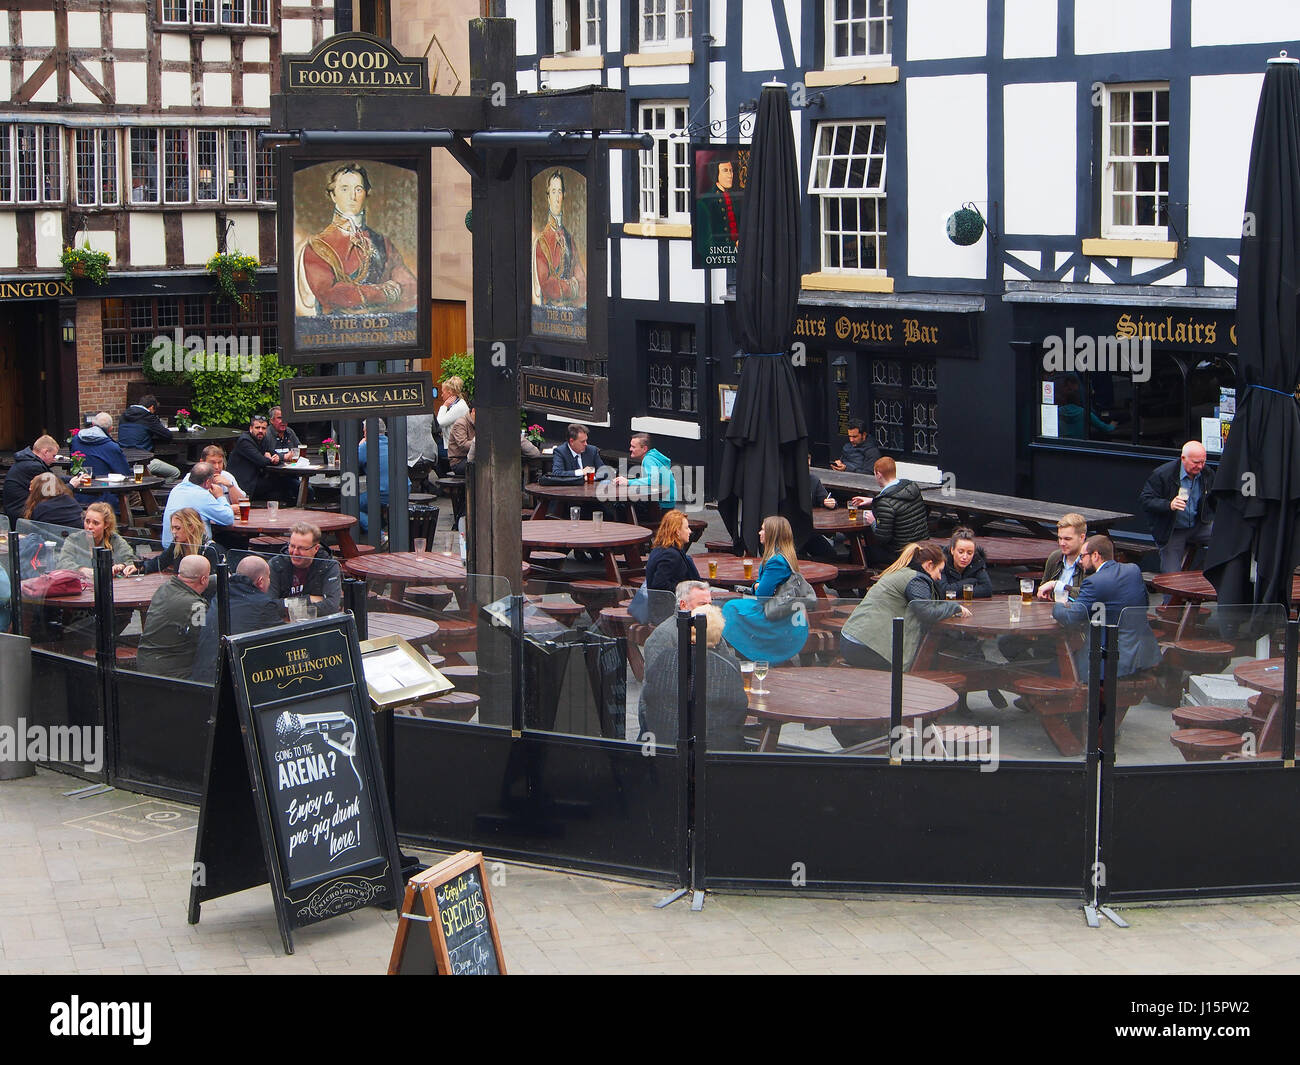 People relaxing with a drink and food outside the Sinclairs Oyster Bar and the Old Welllington Inn, in the centre center of Manchester, England, UK. Stock Photo